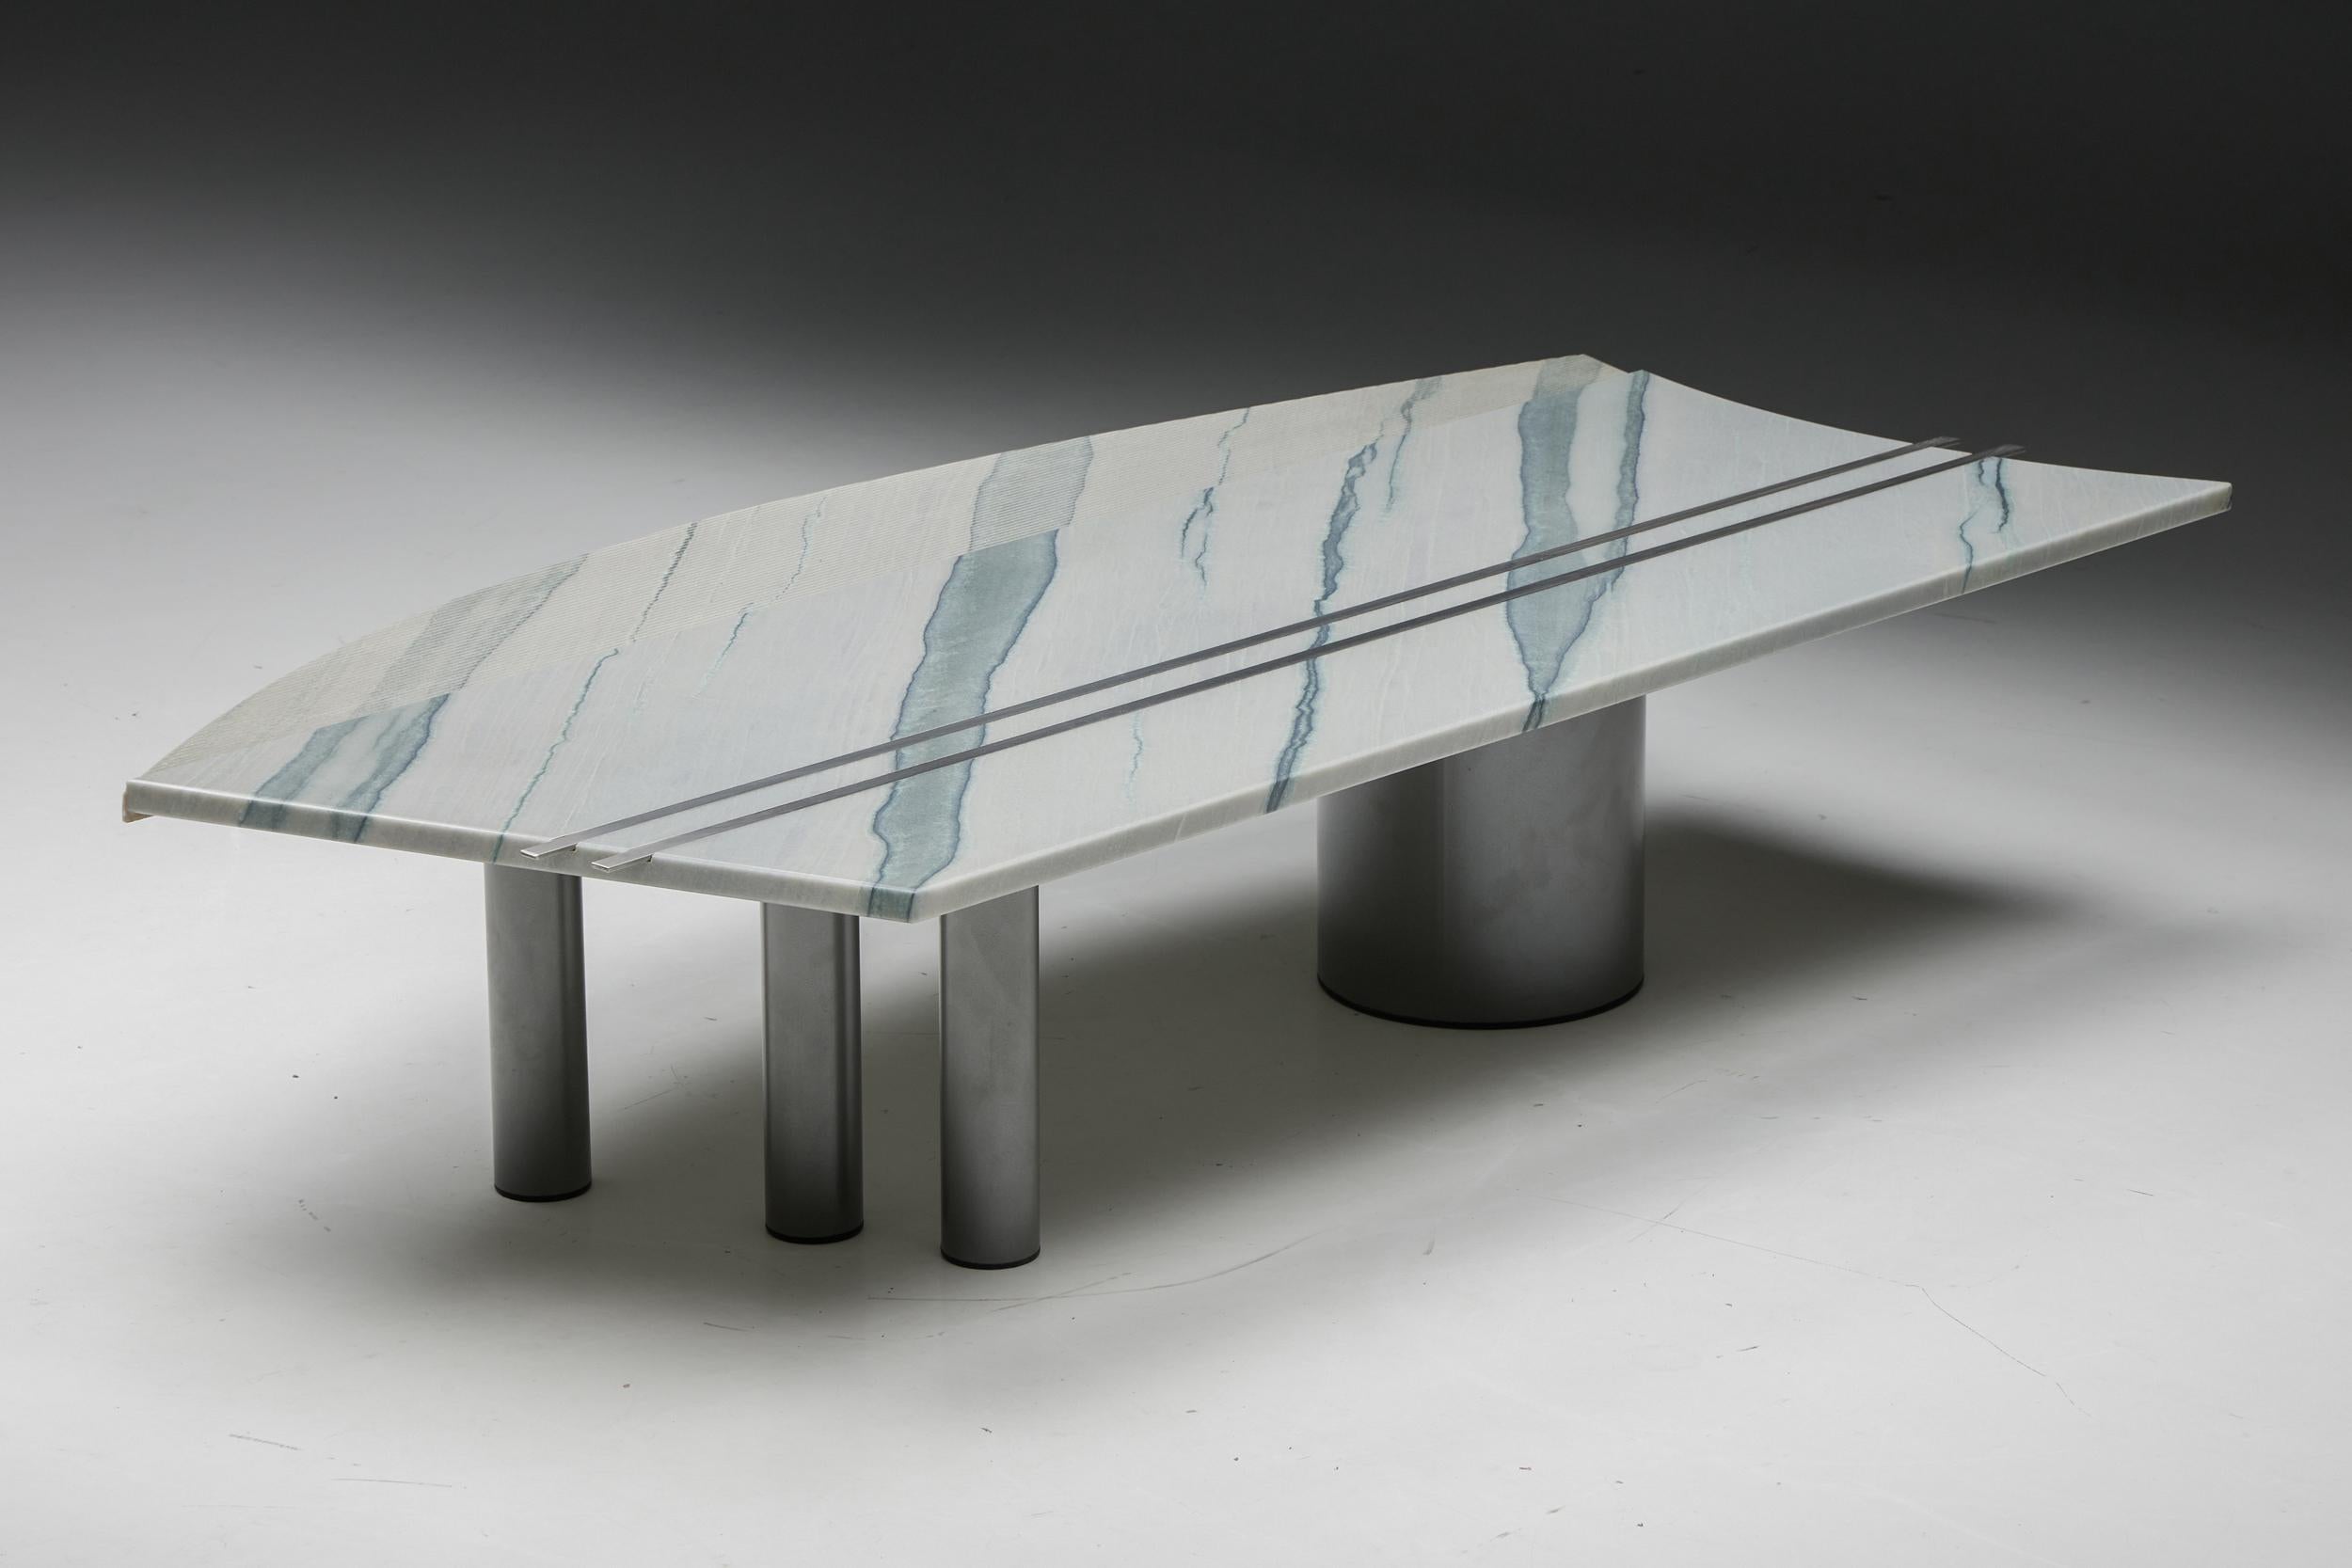 Steel Pia Manu Sculptural Marble Coffee Table, 1990s For Sale